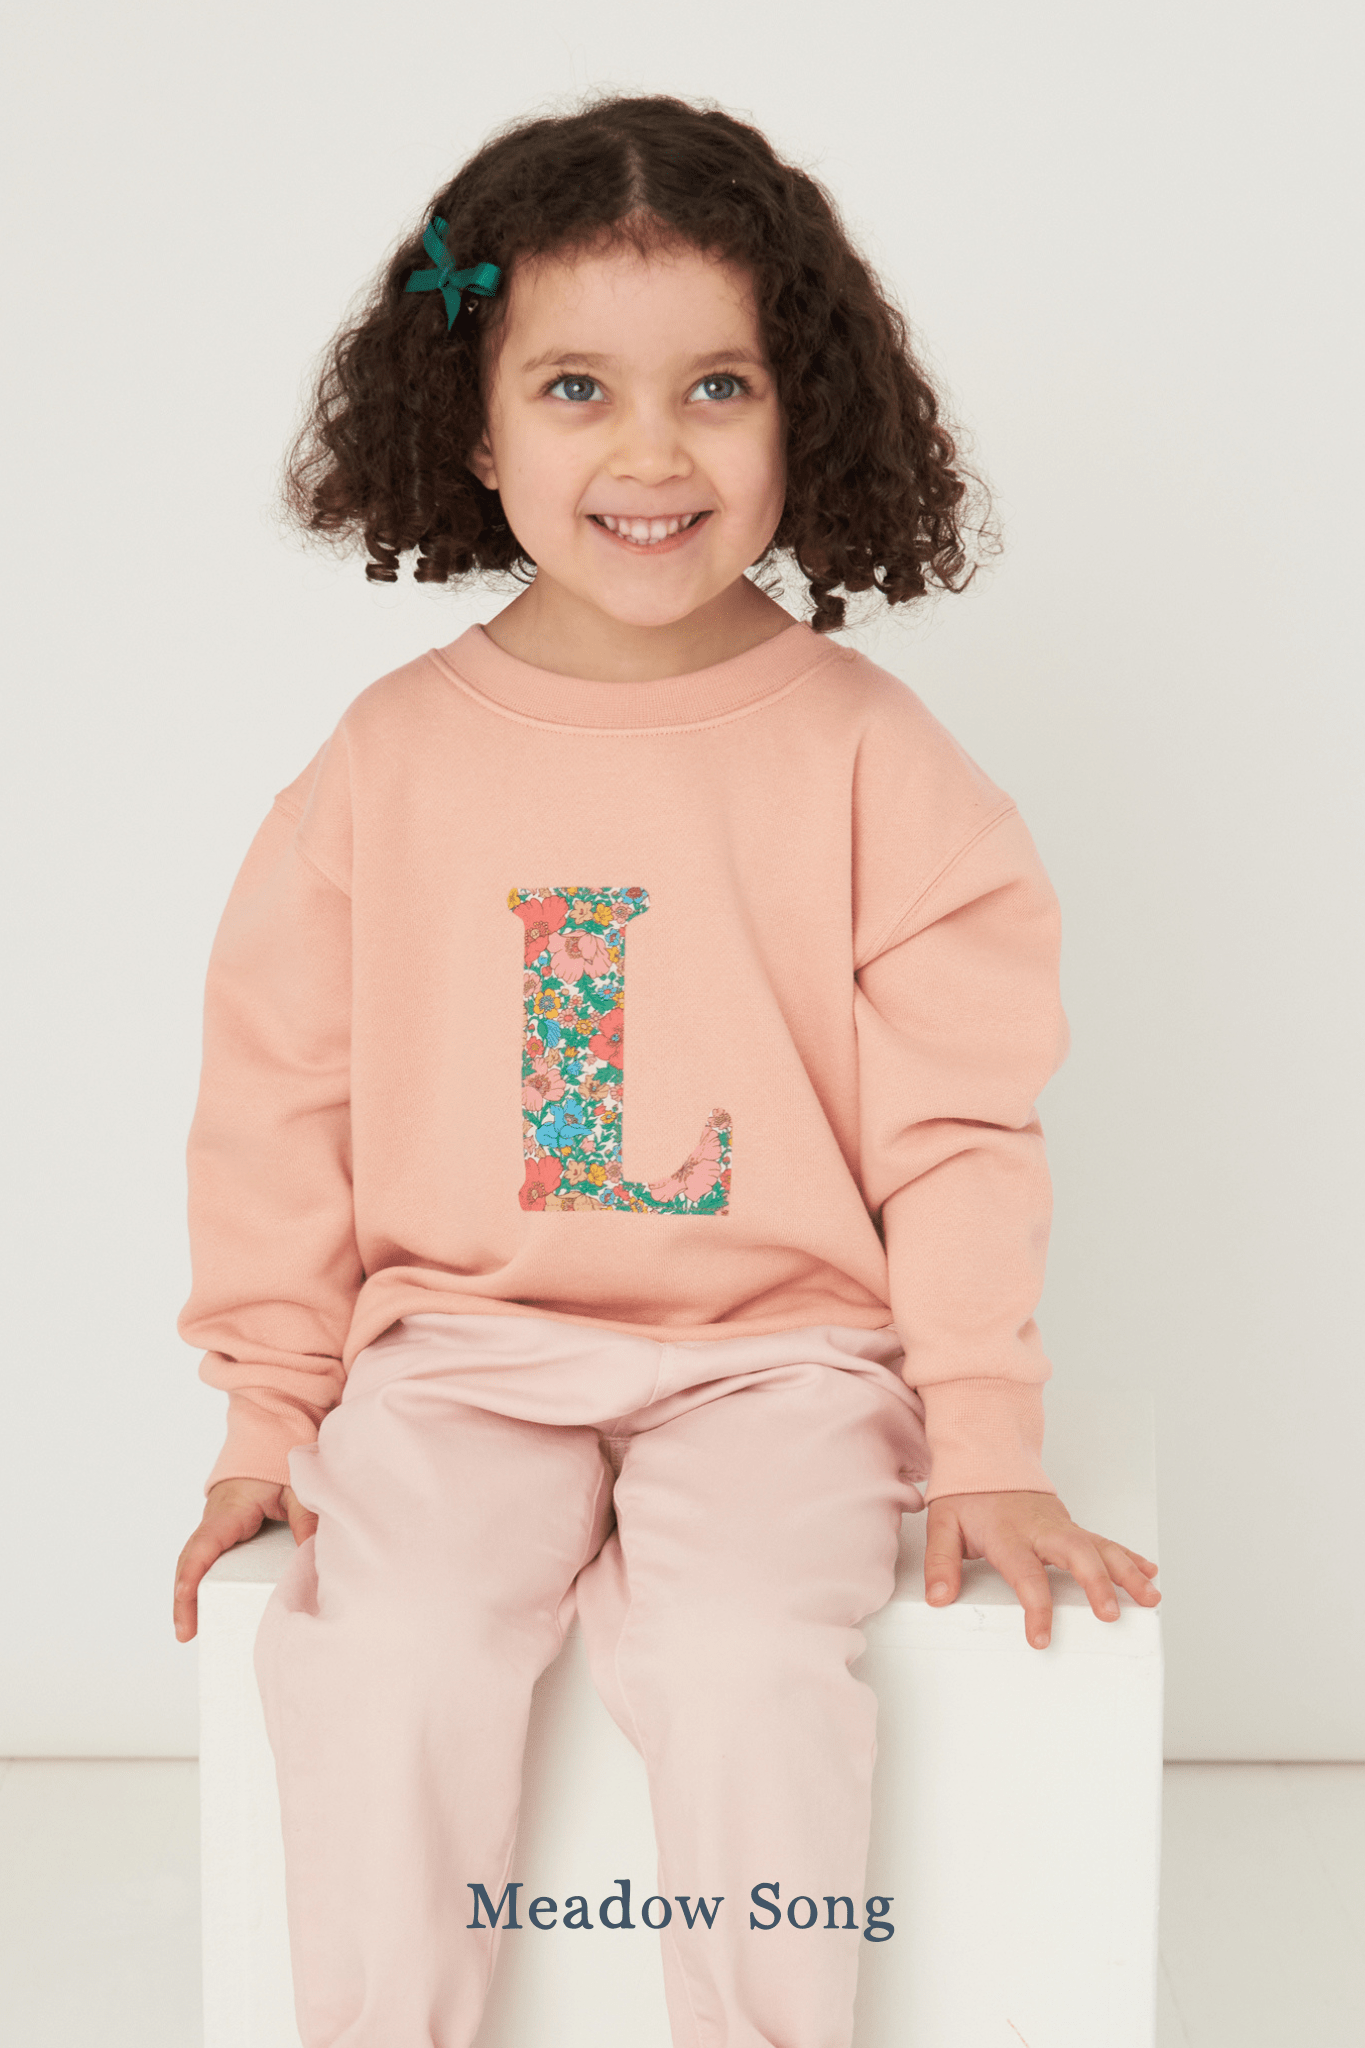 Magnificent Stanley sweatshirt CREATE YOUR OWN Dusty Pink Sweatshirt in Choice of Liberty Print